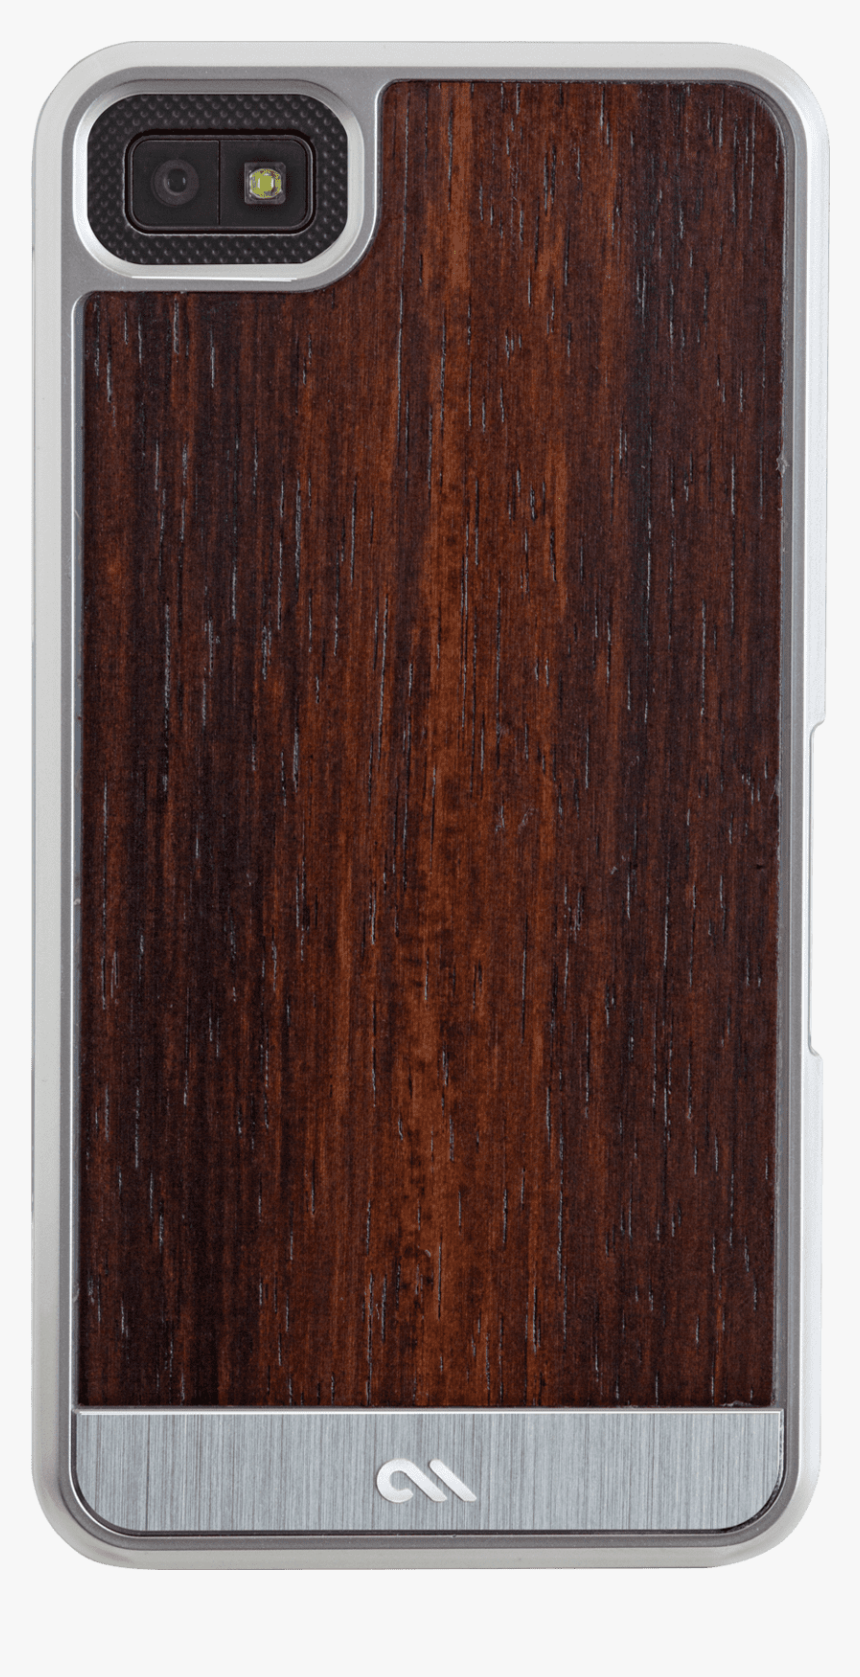 The Rosewood Blackberry Z10 Case Is Inspired By A Classic - Mobile Phone Case, HD Png Download, Free Download